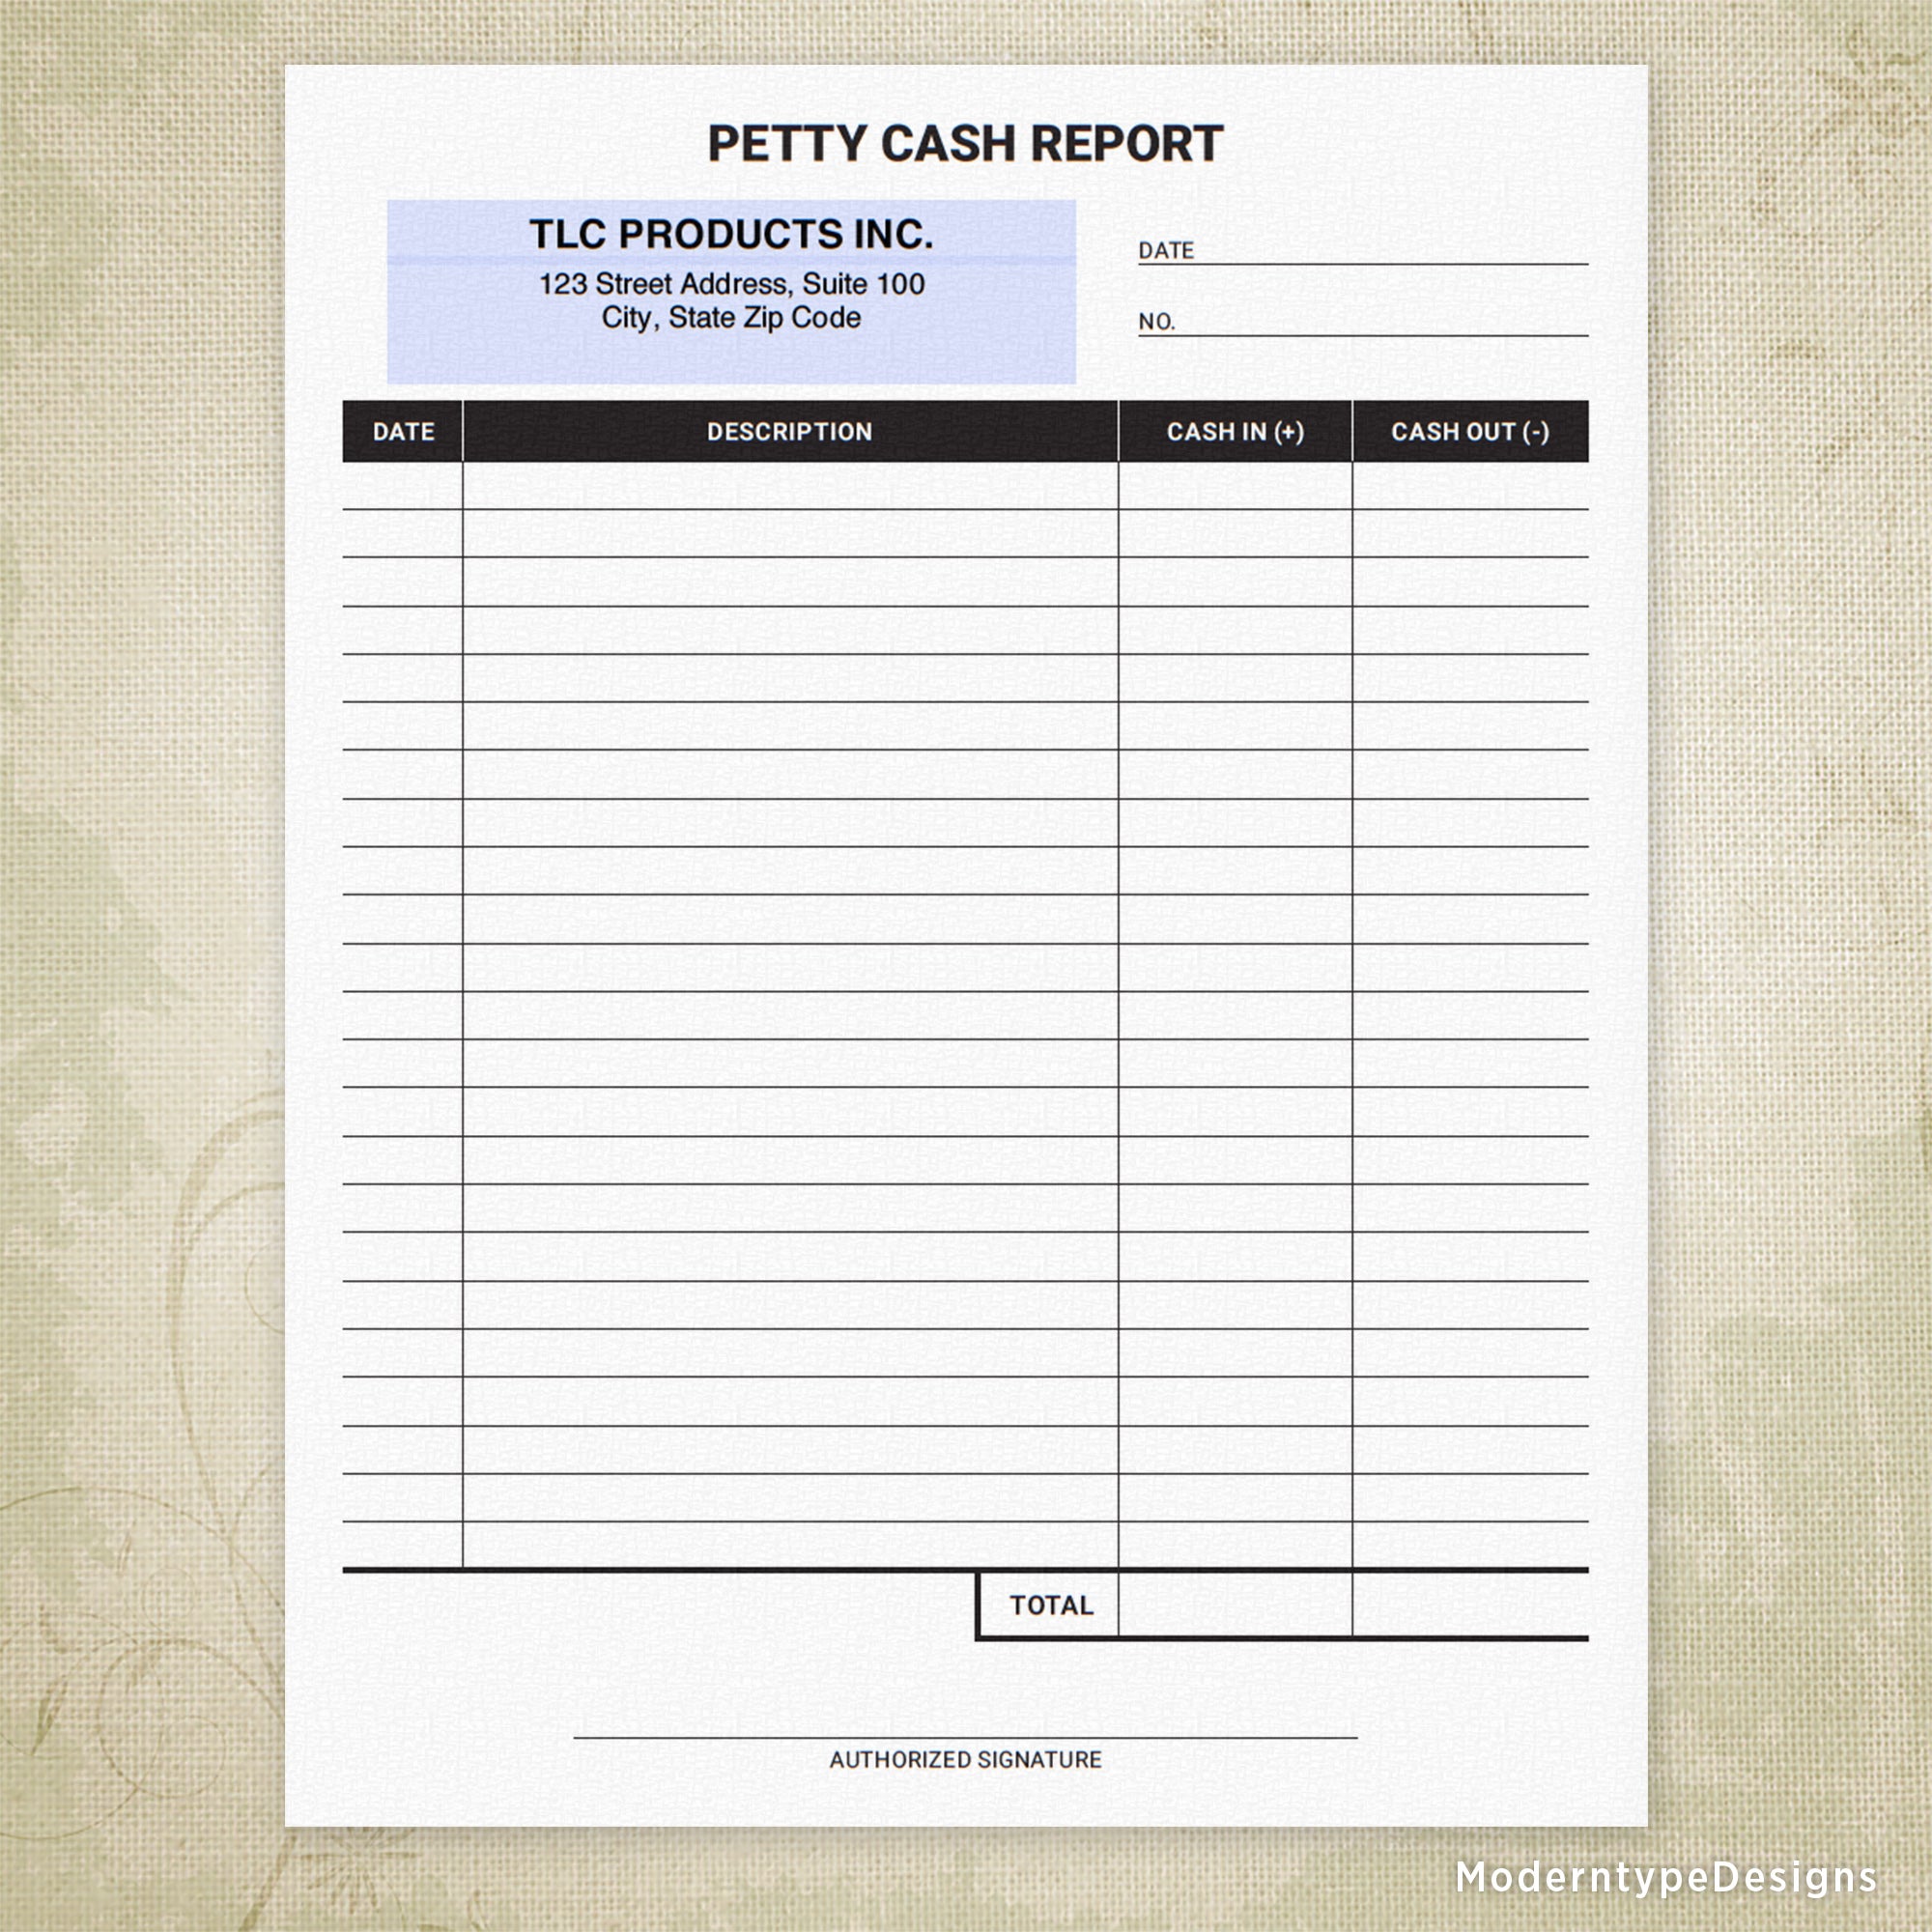 Petty Cash Report Printable Form, Personalized